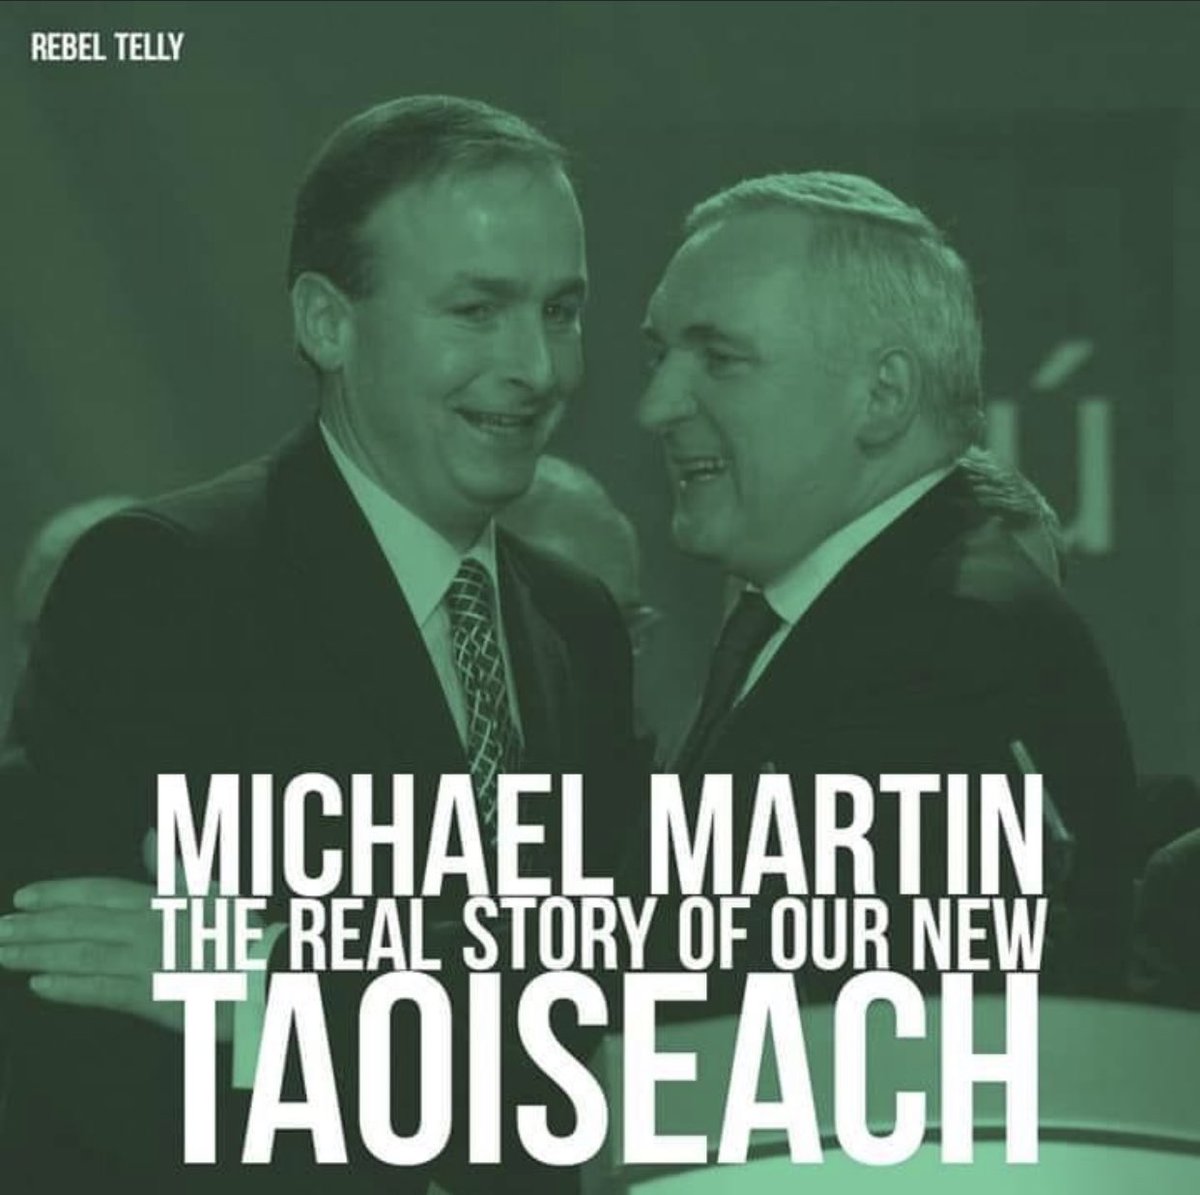 MT - NOT MY TAOISEACH - NEW TAOISEACH IS A CROOK! Michael Martin is a gangster. Michael Martin will be the first Taoiseach in the new 'rotating' arrangement with Fine Gael and the Greens.